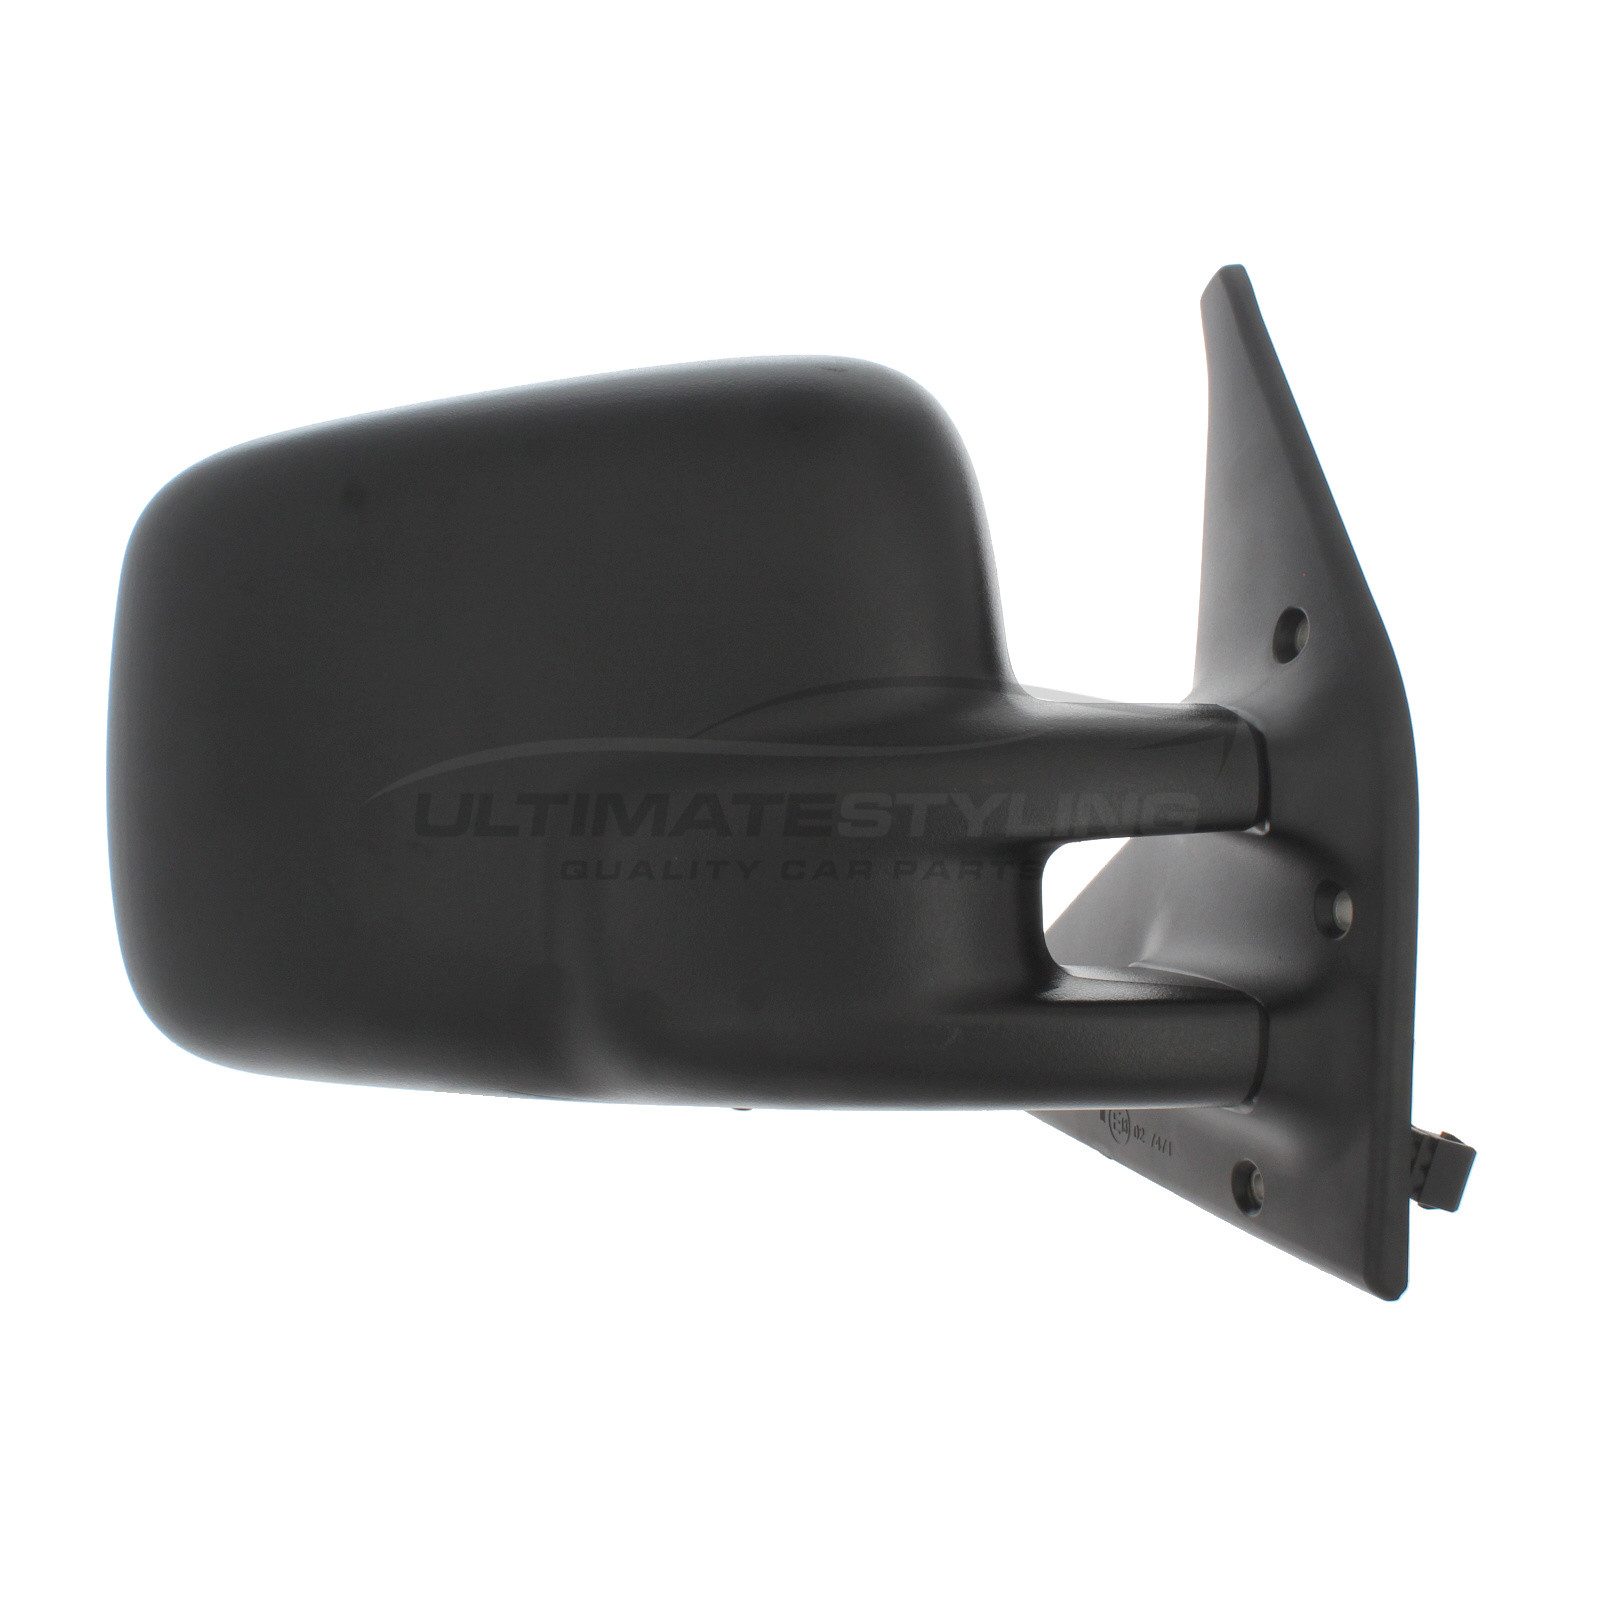 VW Transporter T4 Mirror covers 